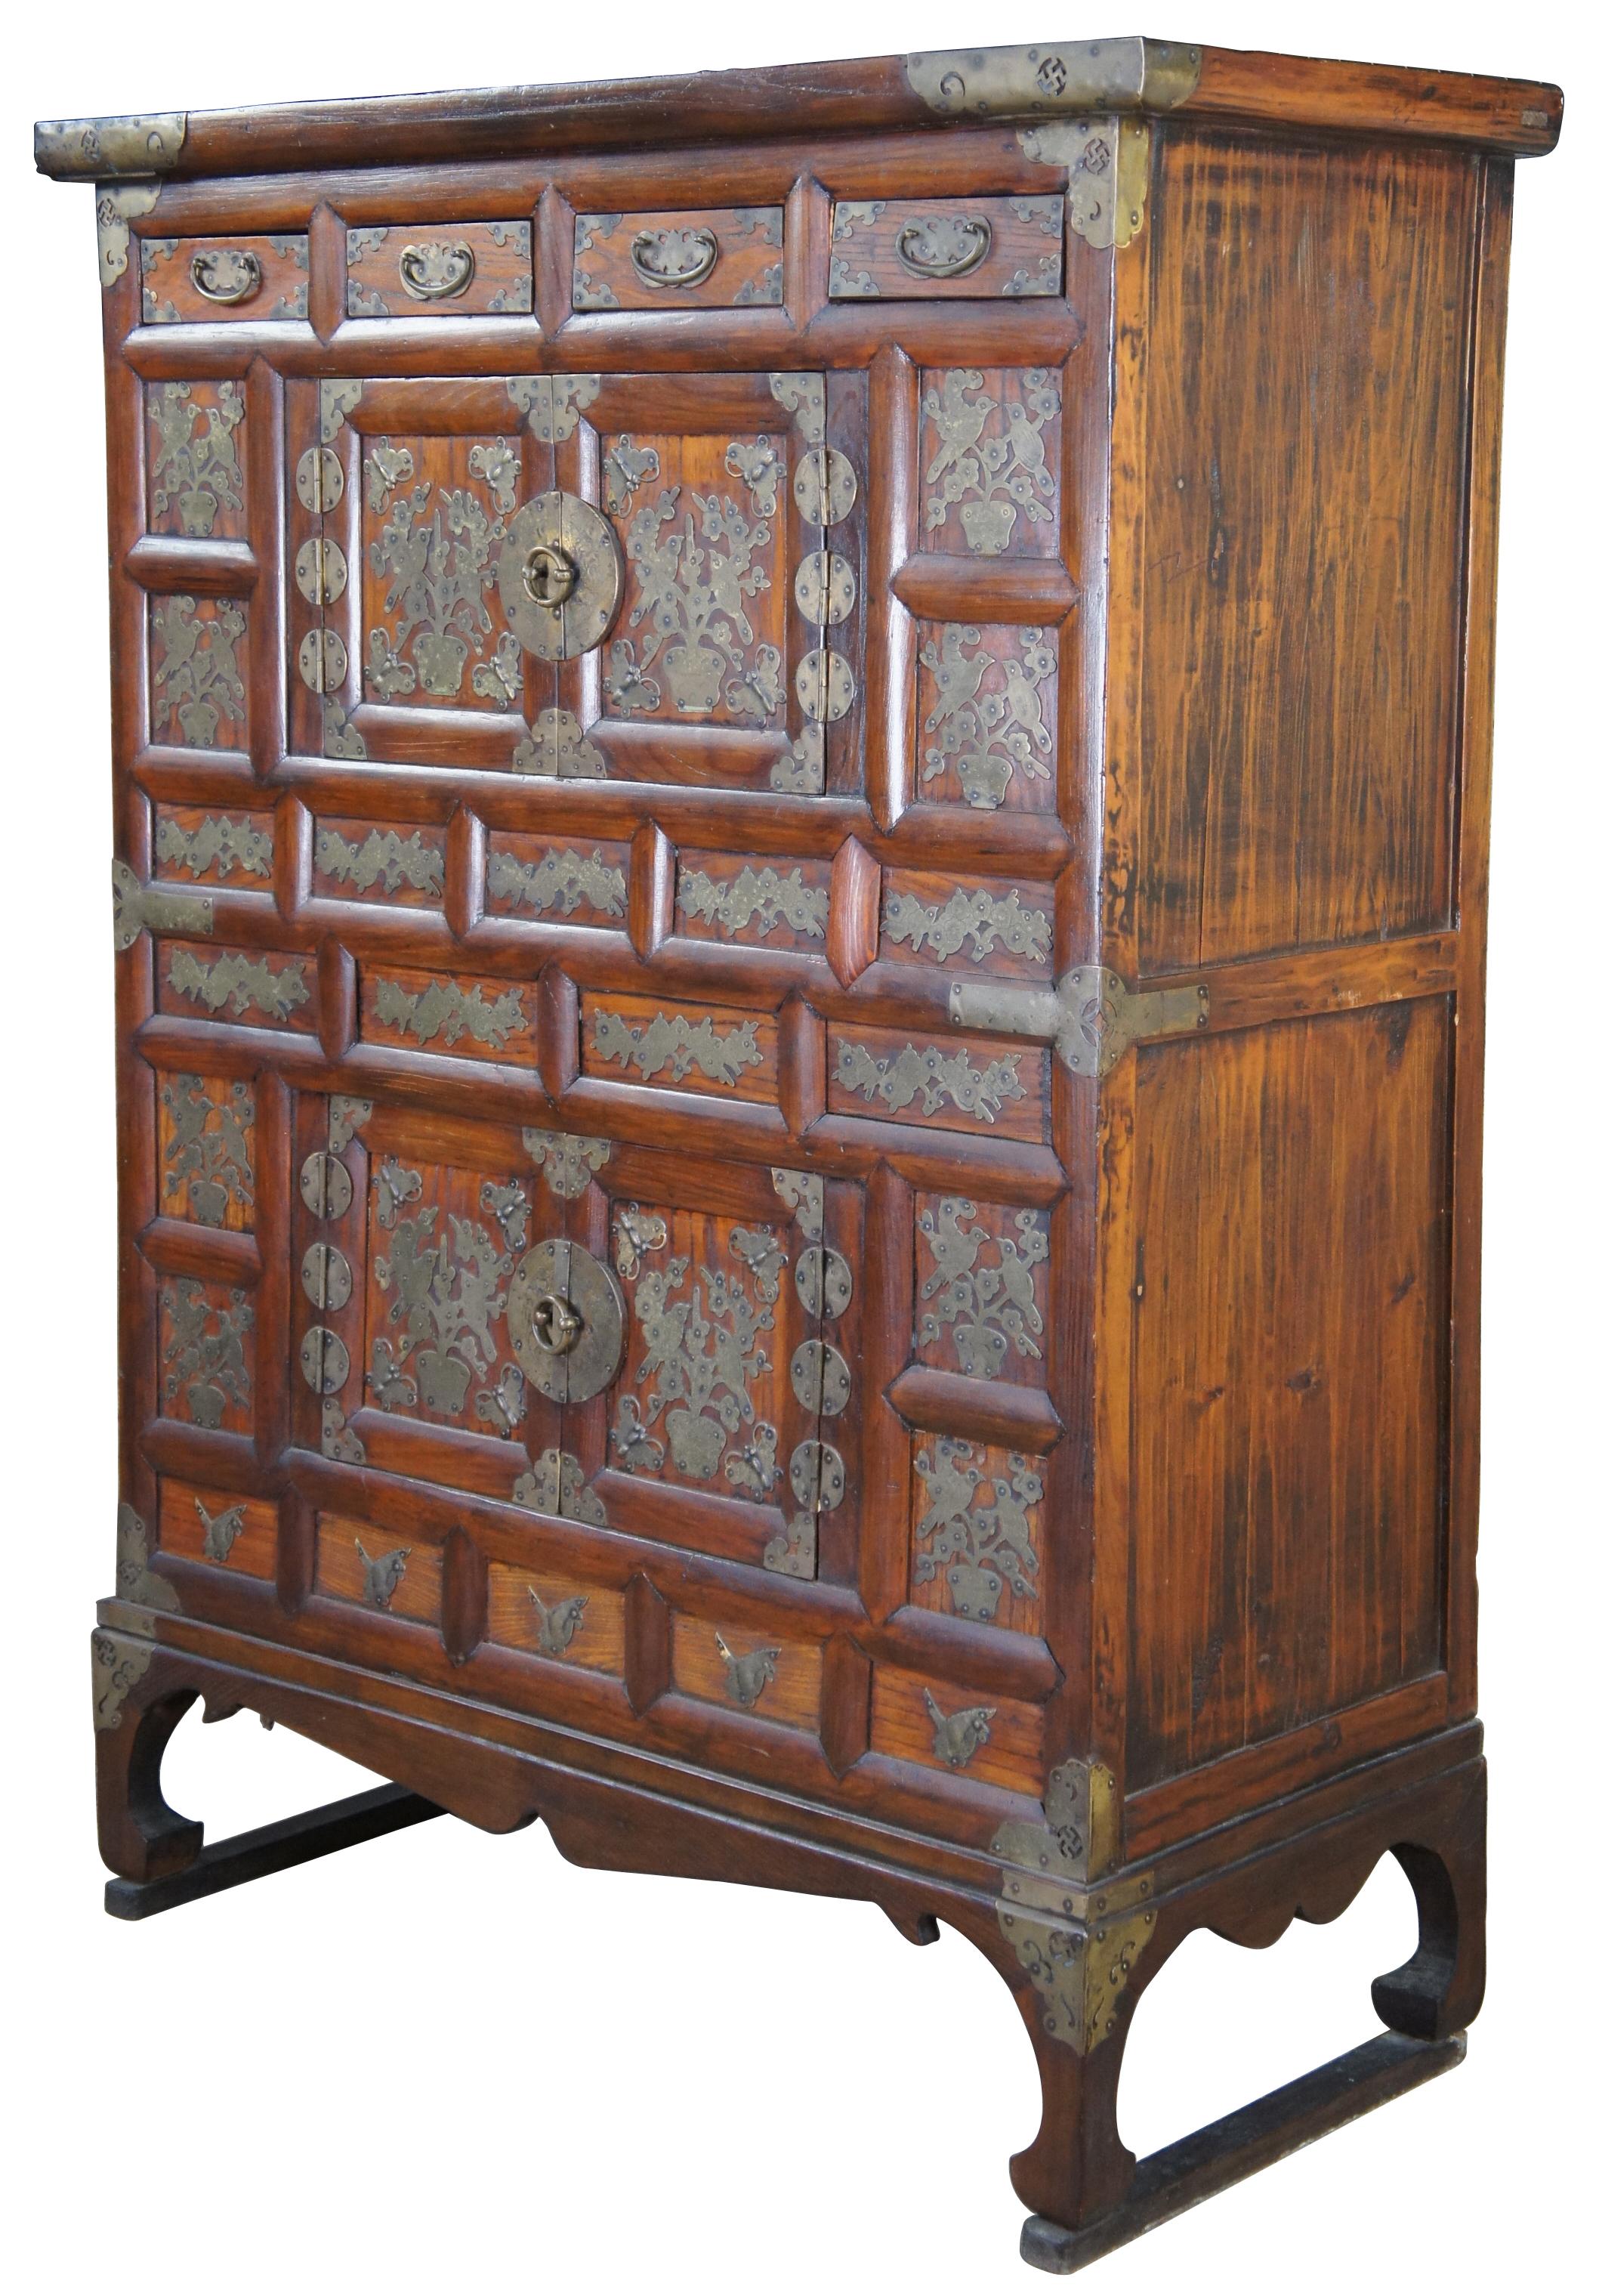 Early 19th Century Korean Tansu Nong Bandaji wedding chests or cabinet made of elmwood featuring ornate brass bird, butterfly and sawastika accents. The swastika symbol, ? (right-facing or clockwise) or ? (left-facing, counterclockwise, or